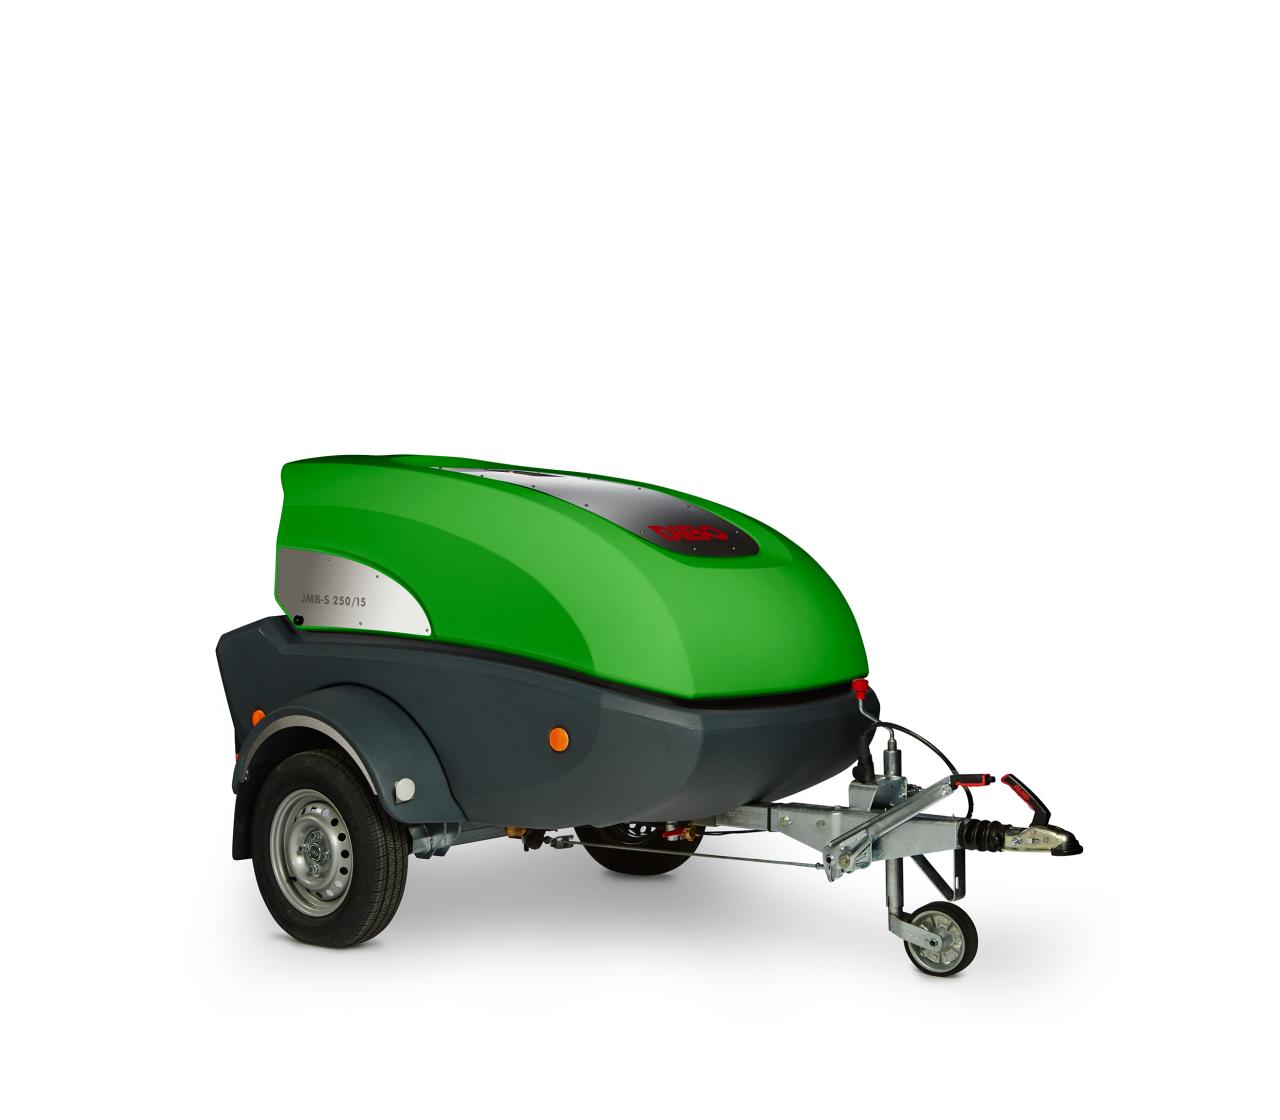 DiBO JMB-S is an ultra-compact mobile hot water pressure washer on a trailer equipped with modern & green technologies